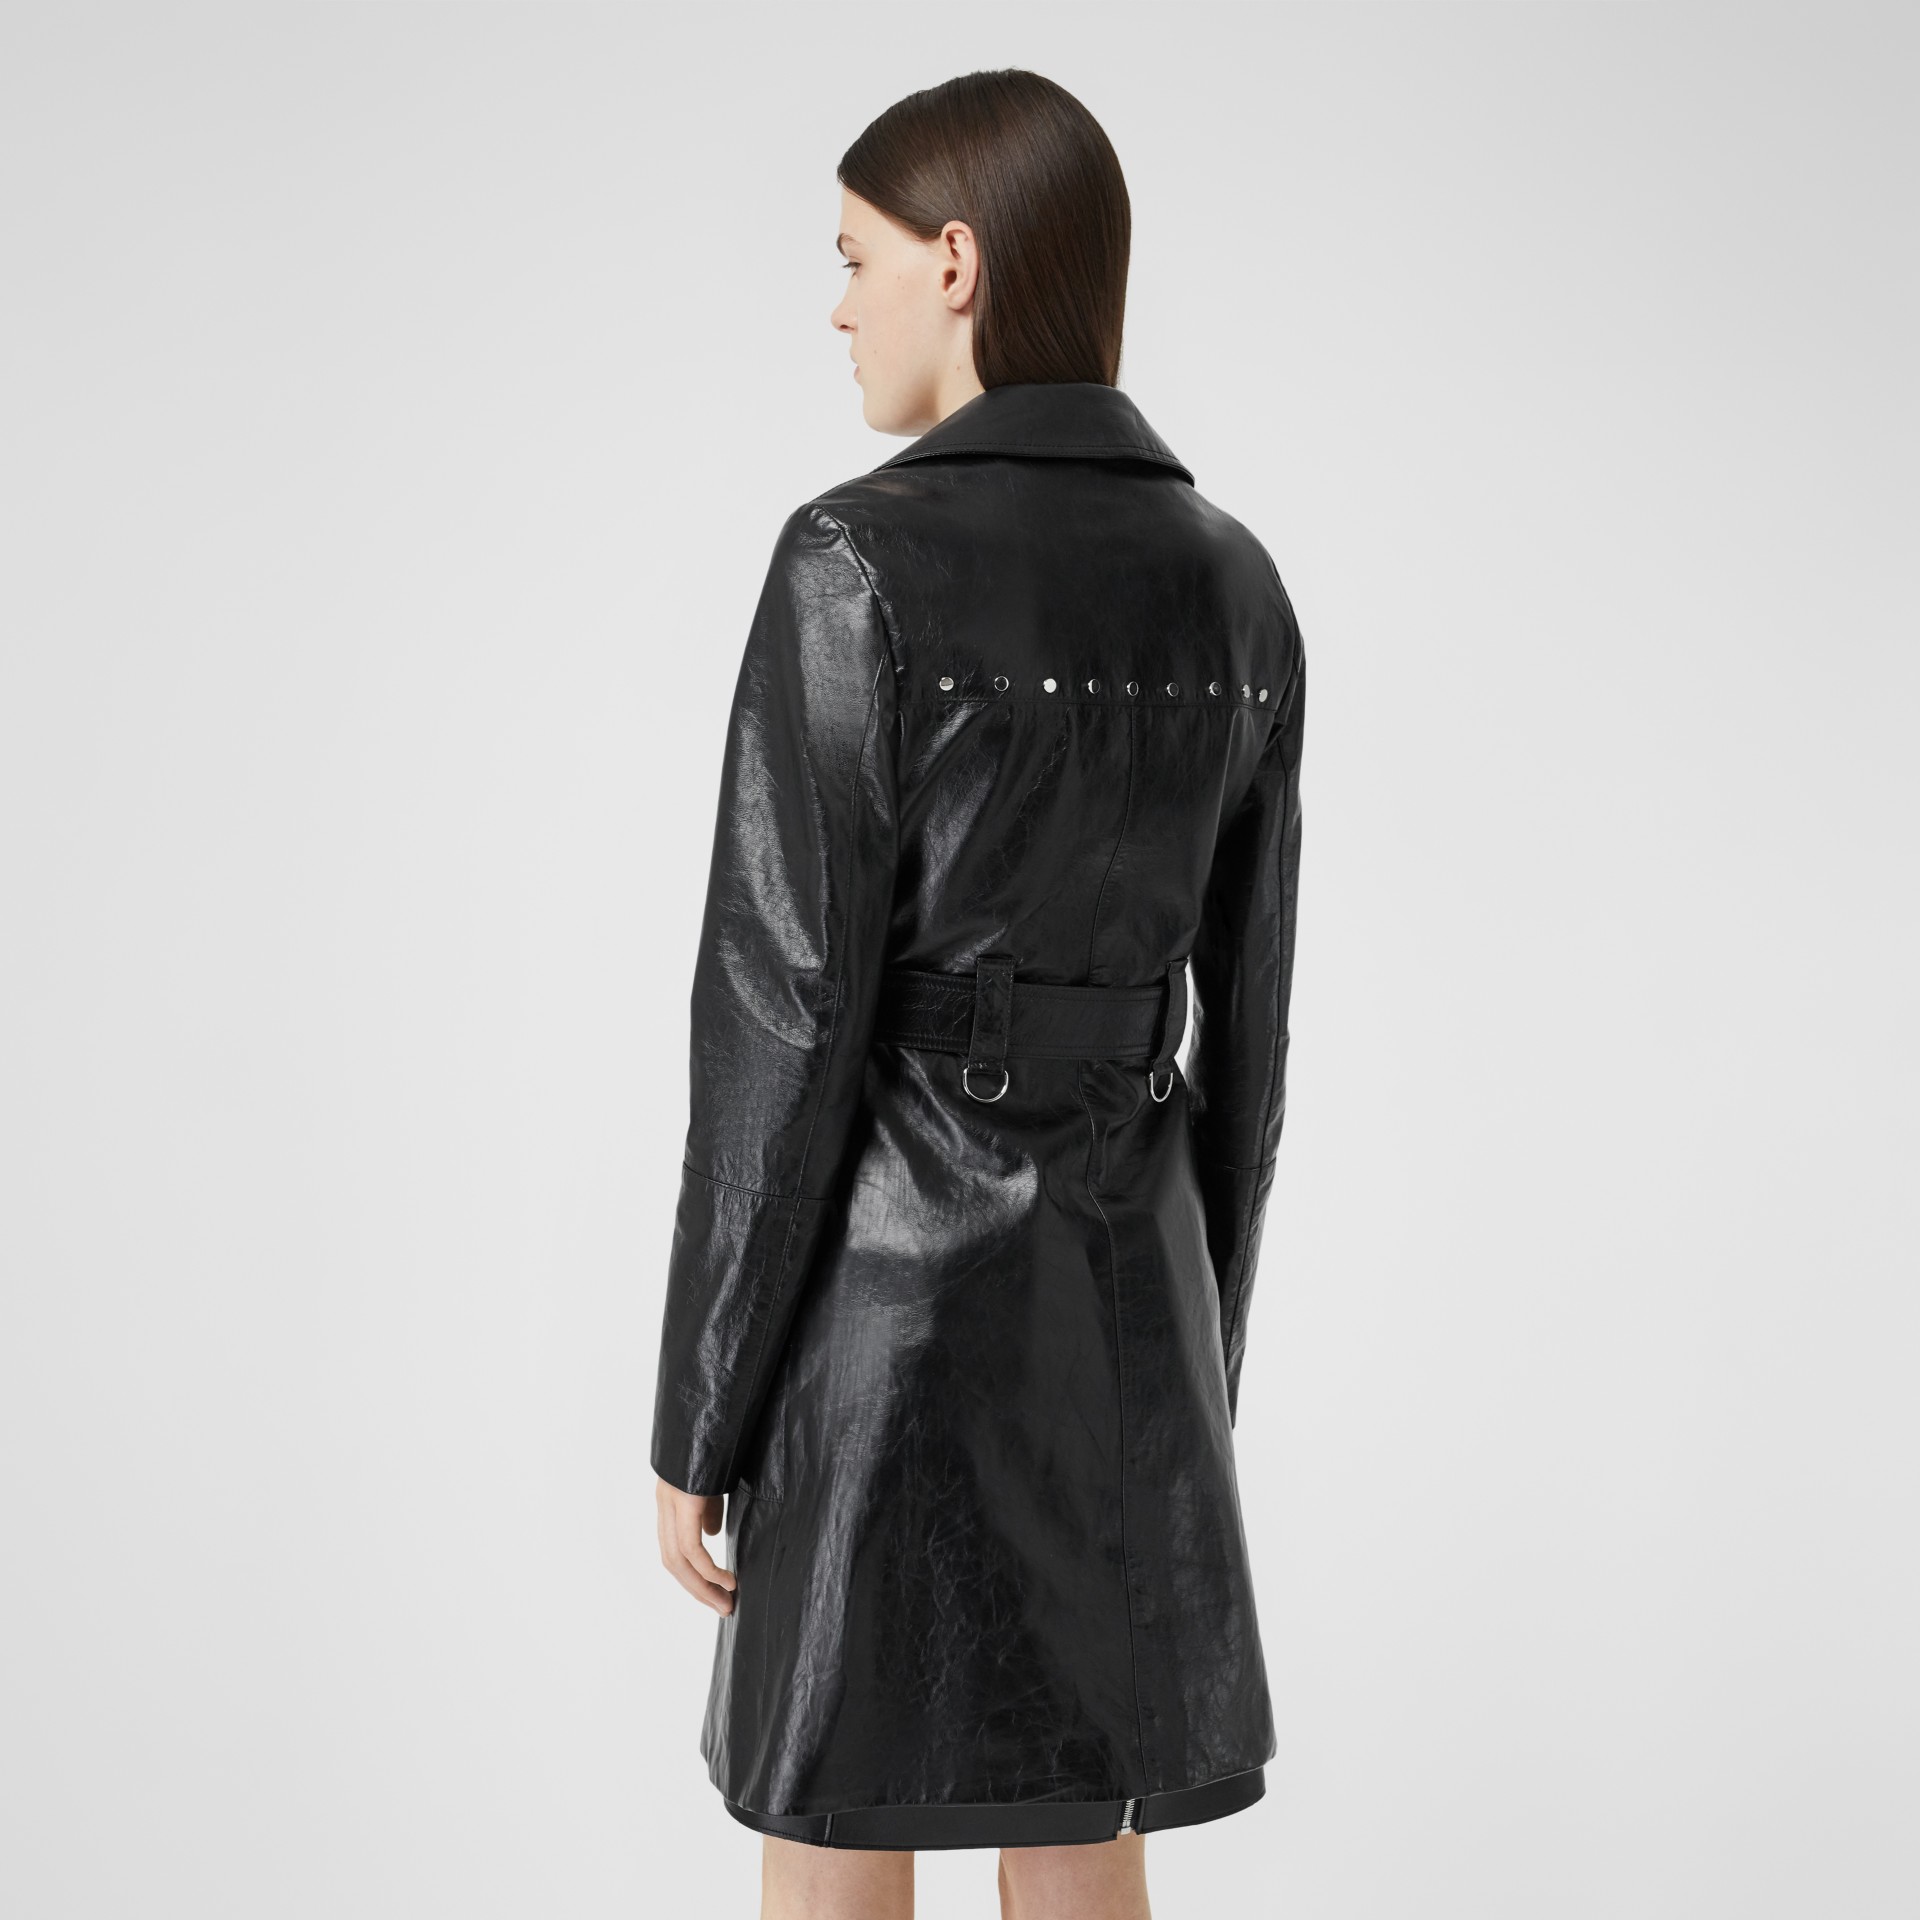 Studded Crinkled Leather Trench Coat in Black - Women | Burberry Canada